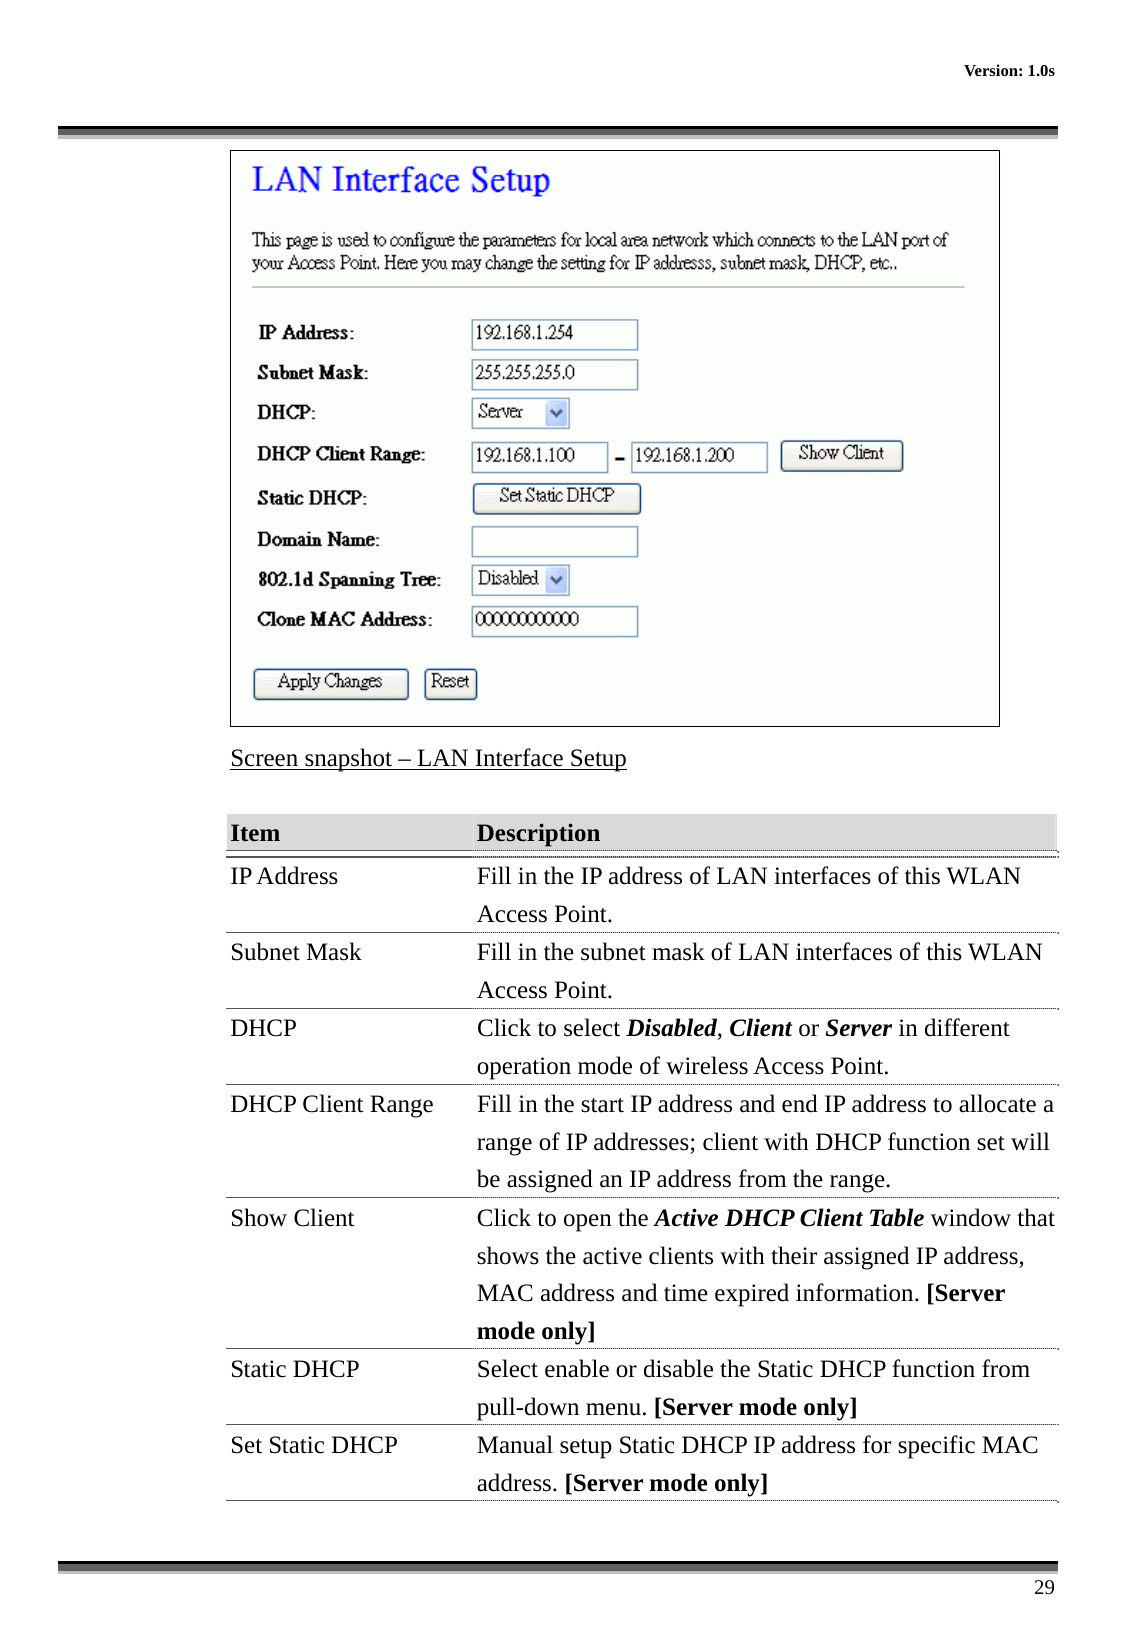    Version: 1.0s      29  Screen snapshot – LAN Interface Setup  Item  Description   IP Address  Fill in the IP address of LAN interfaces of this WLAN Access Point. Subnet Mask  Fill in the subnet mask of LAN interfaces of this WLAN Access Point. DHCP  Click to select Disabled, Client or Server in different operation mode of wireless Access Point. DHCP Client Range  Fill in the start IP address and end IP address to allocate a range of IP addresses; client with DHCP function set will be assigned an IP address from the range. Show Client  Click to open the Active DHCP Client Table window that shows the active clients with their assigned IP address, MAC address and time expired information. [Server mode only] Static DHCP Select enable or disable the Static DHCP function from pull-down menu. [Server mode only] Set Static DHCP Manual setup Static DHCP IP address for specific MAC address. [Server mode only] 